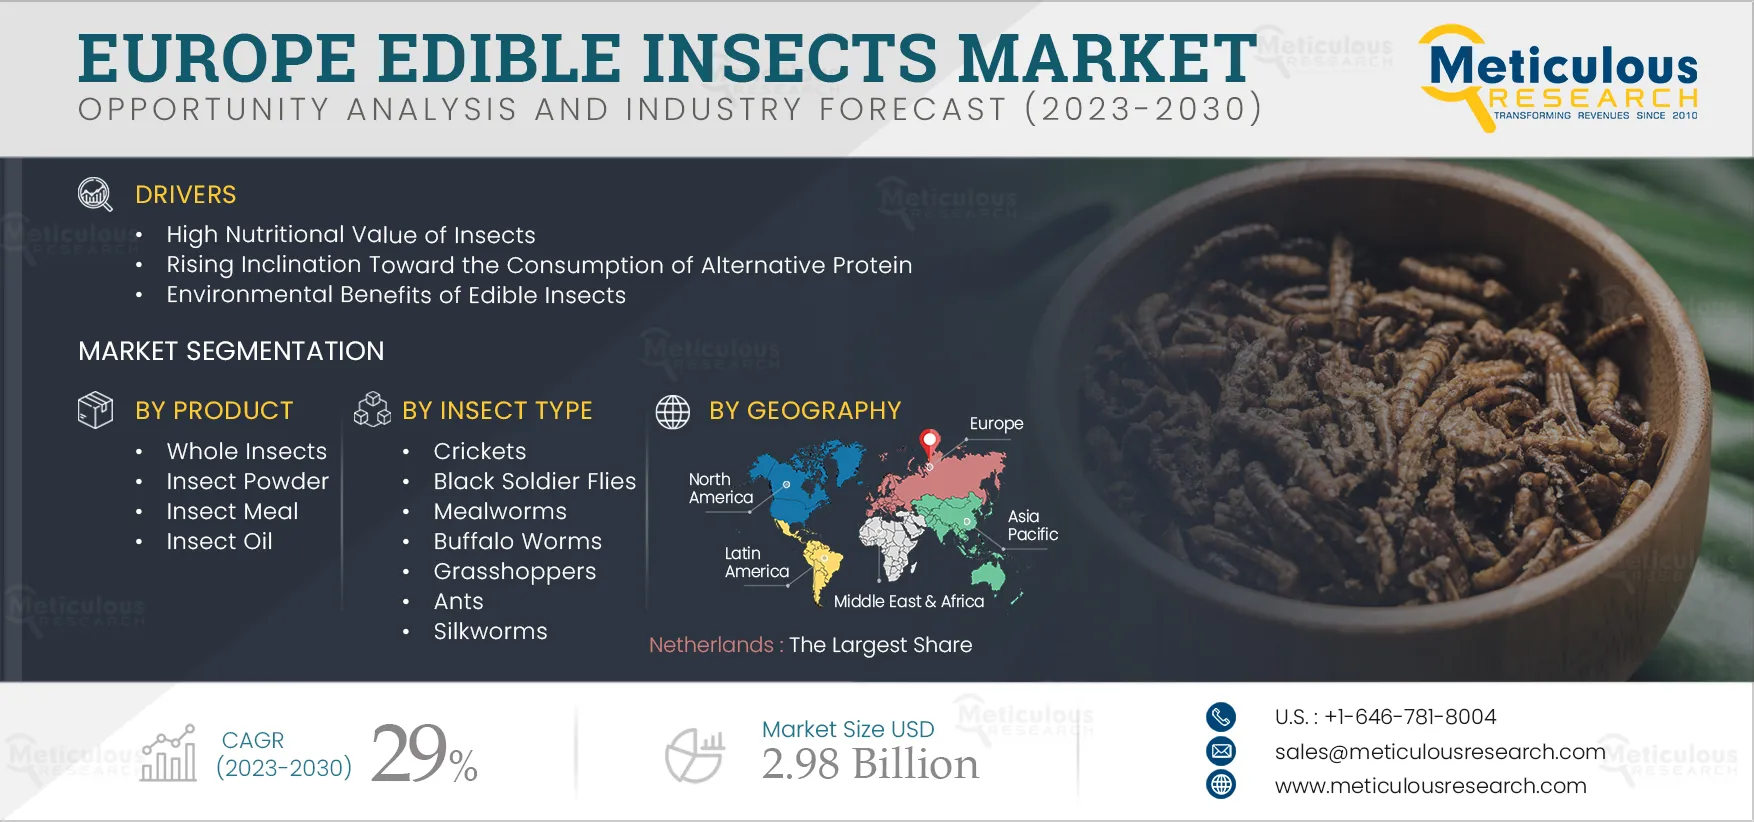 Europe Edible Insects Market